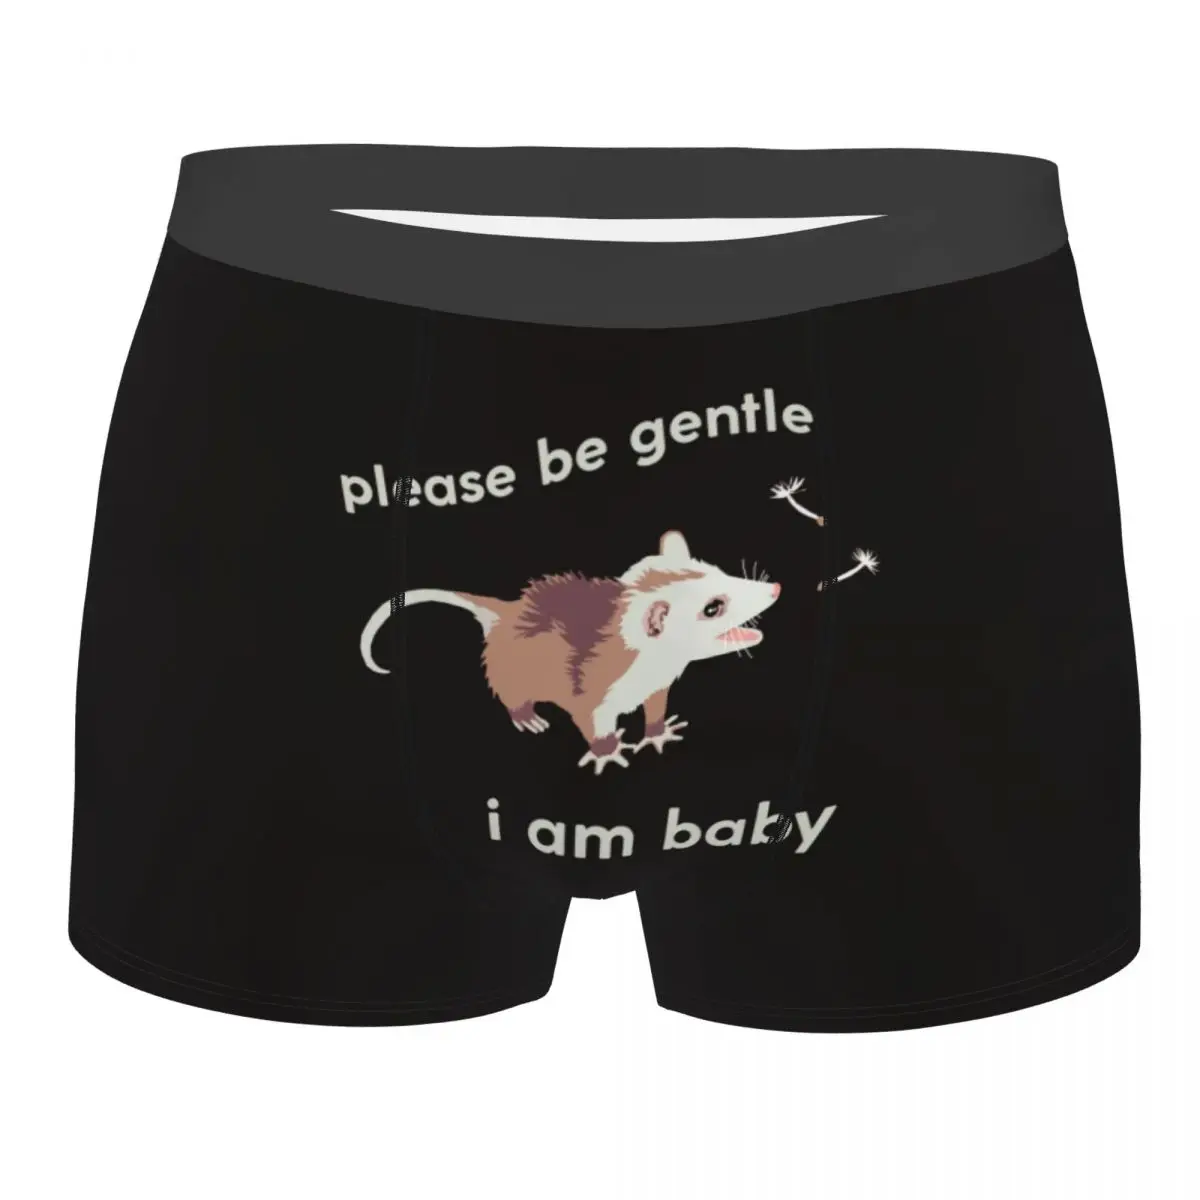 

Funny Opossum Possum Animal Man Underwear Please Be Gentle I Am Baby Boxer Briefs Shorts Panties Funny Soft Underpants for Male